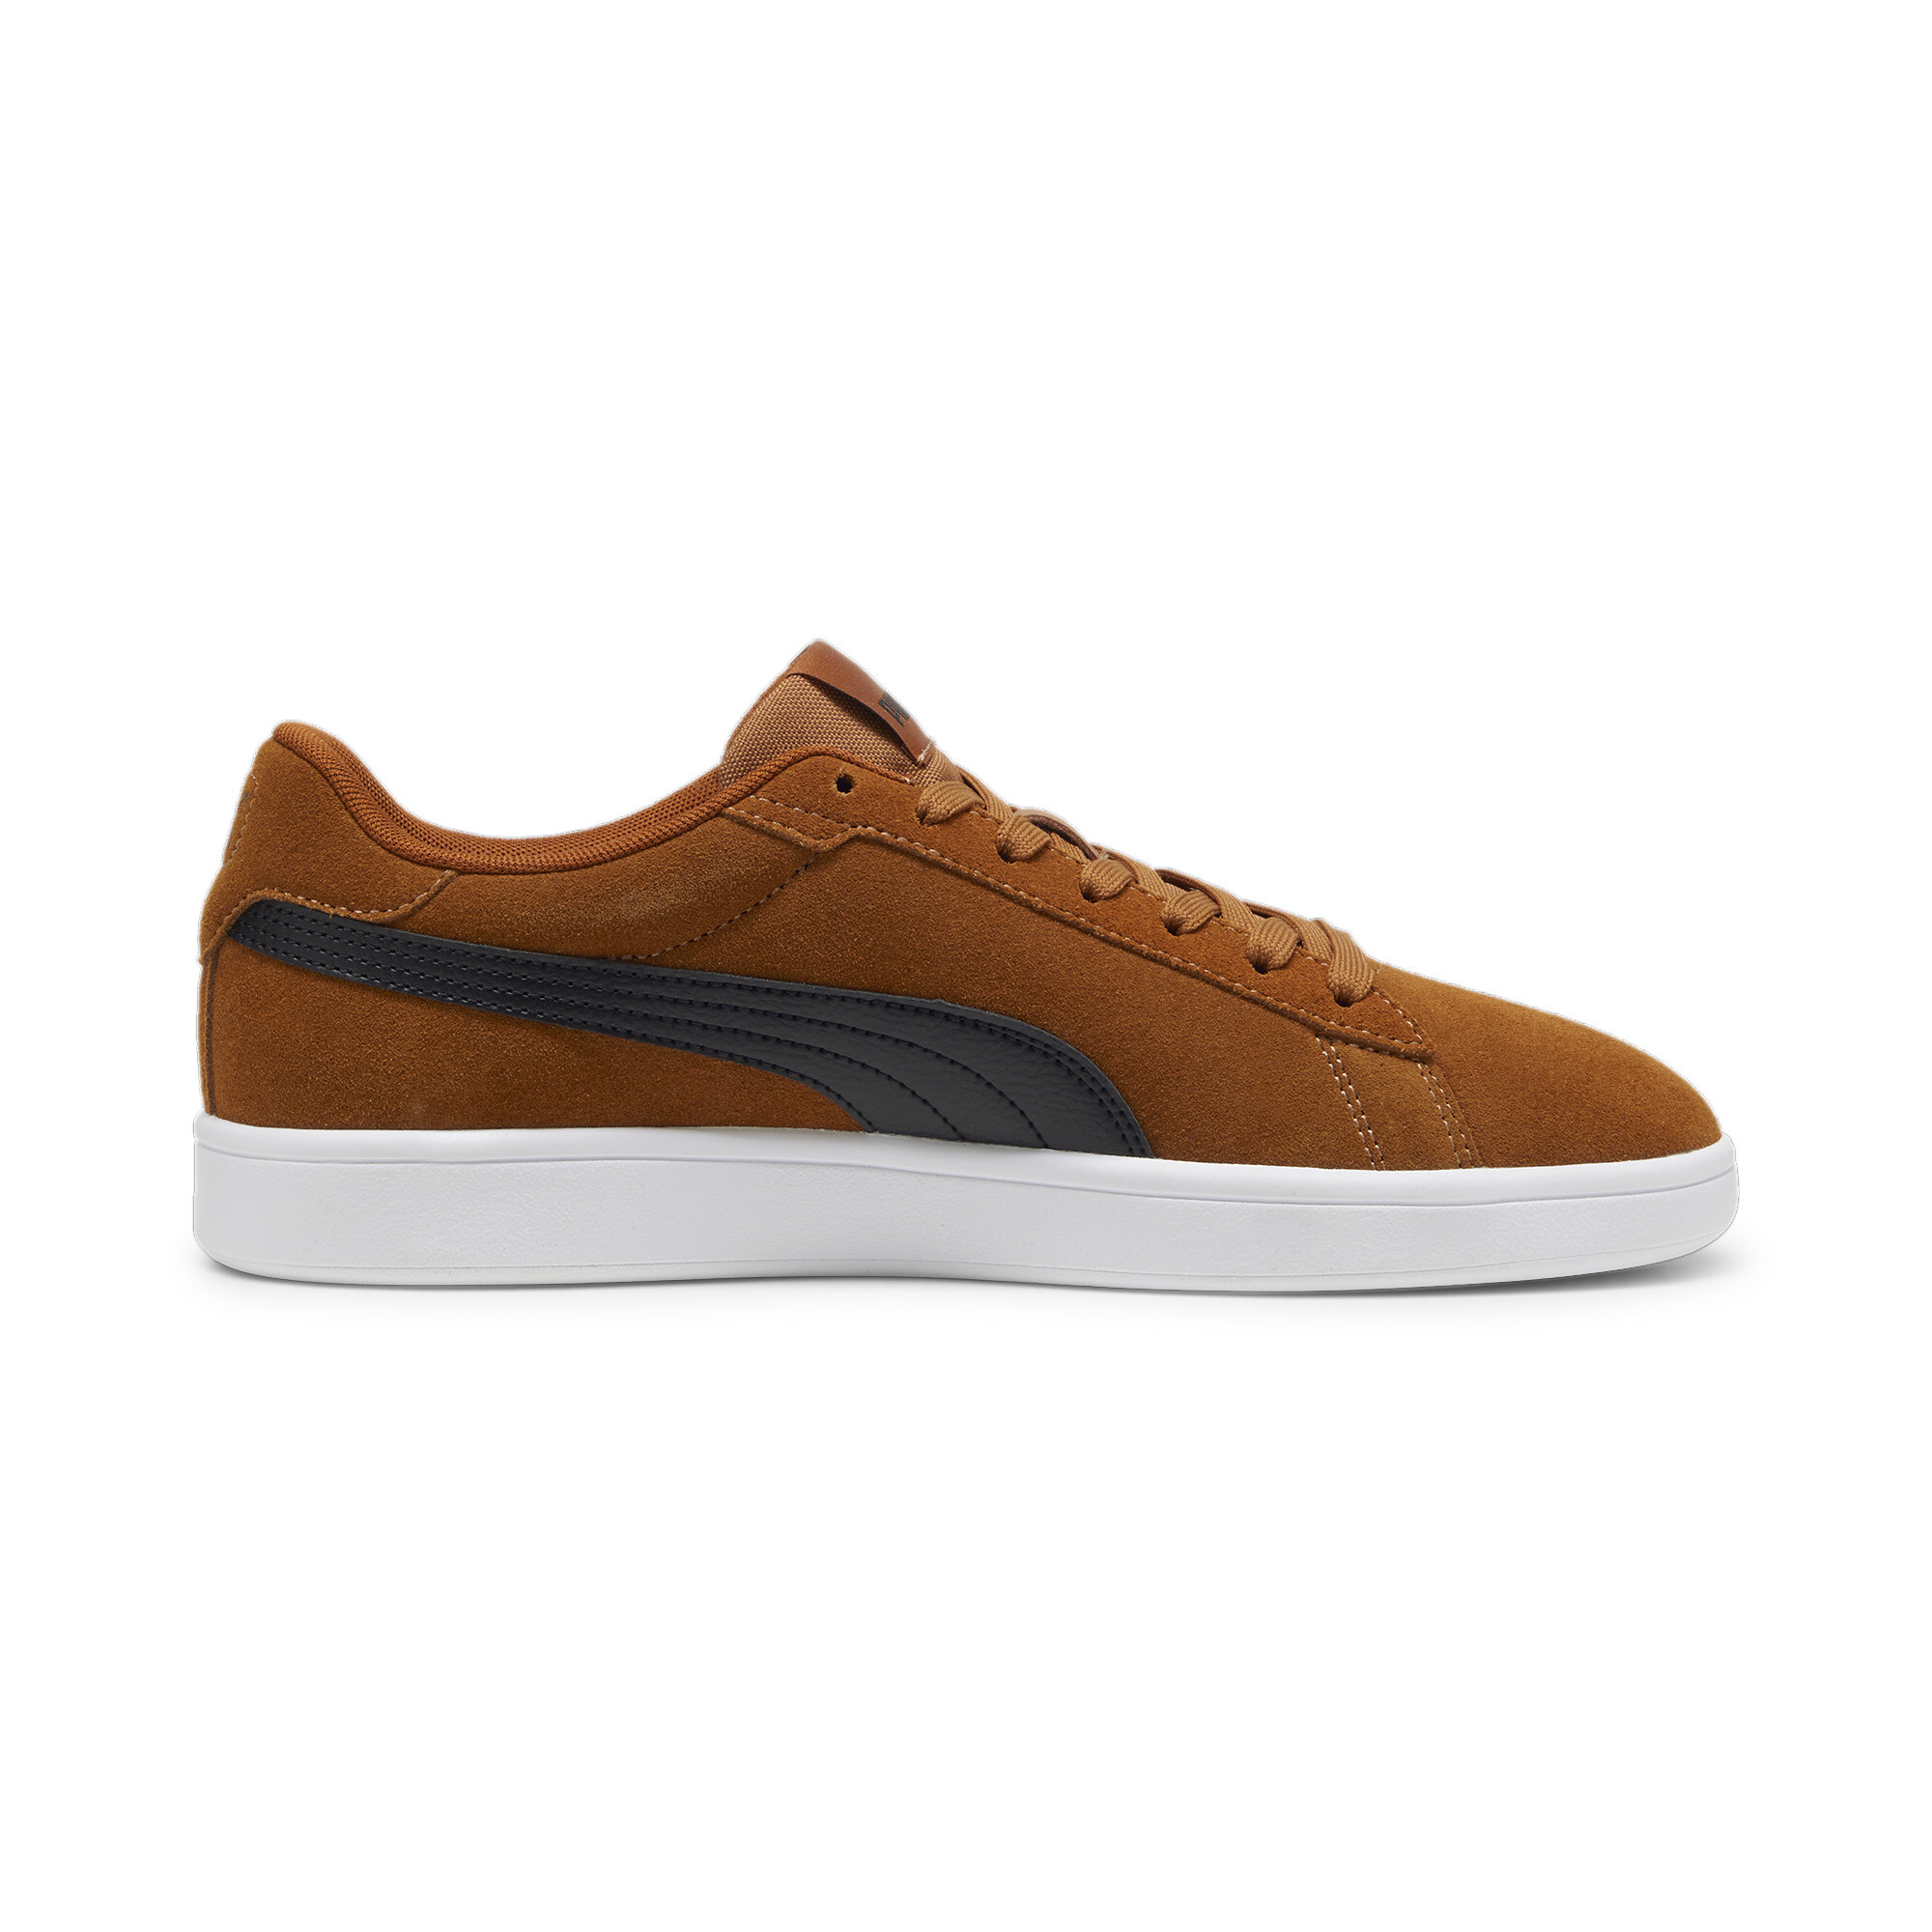 Puma Smash 3.0 Sneakers, Brown, Size 35.5, Shoes